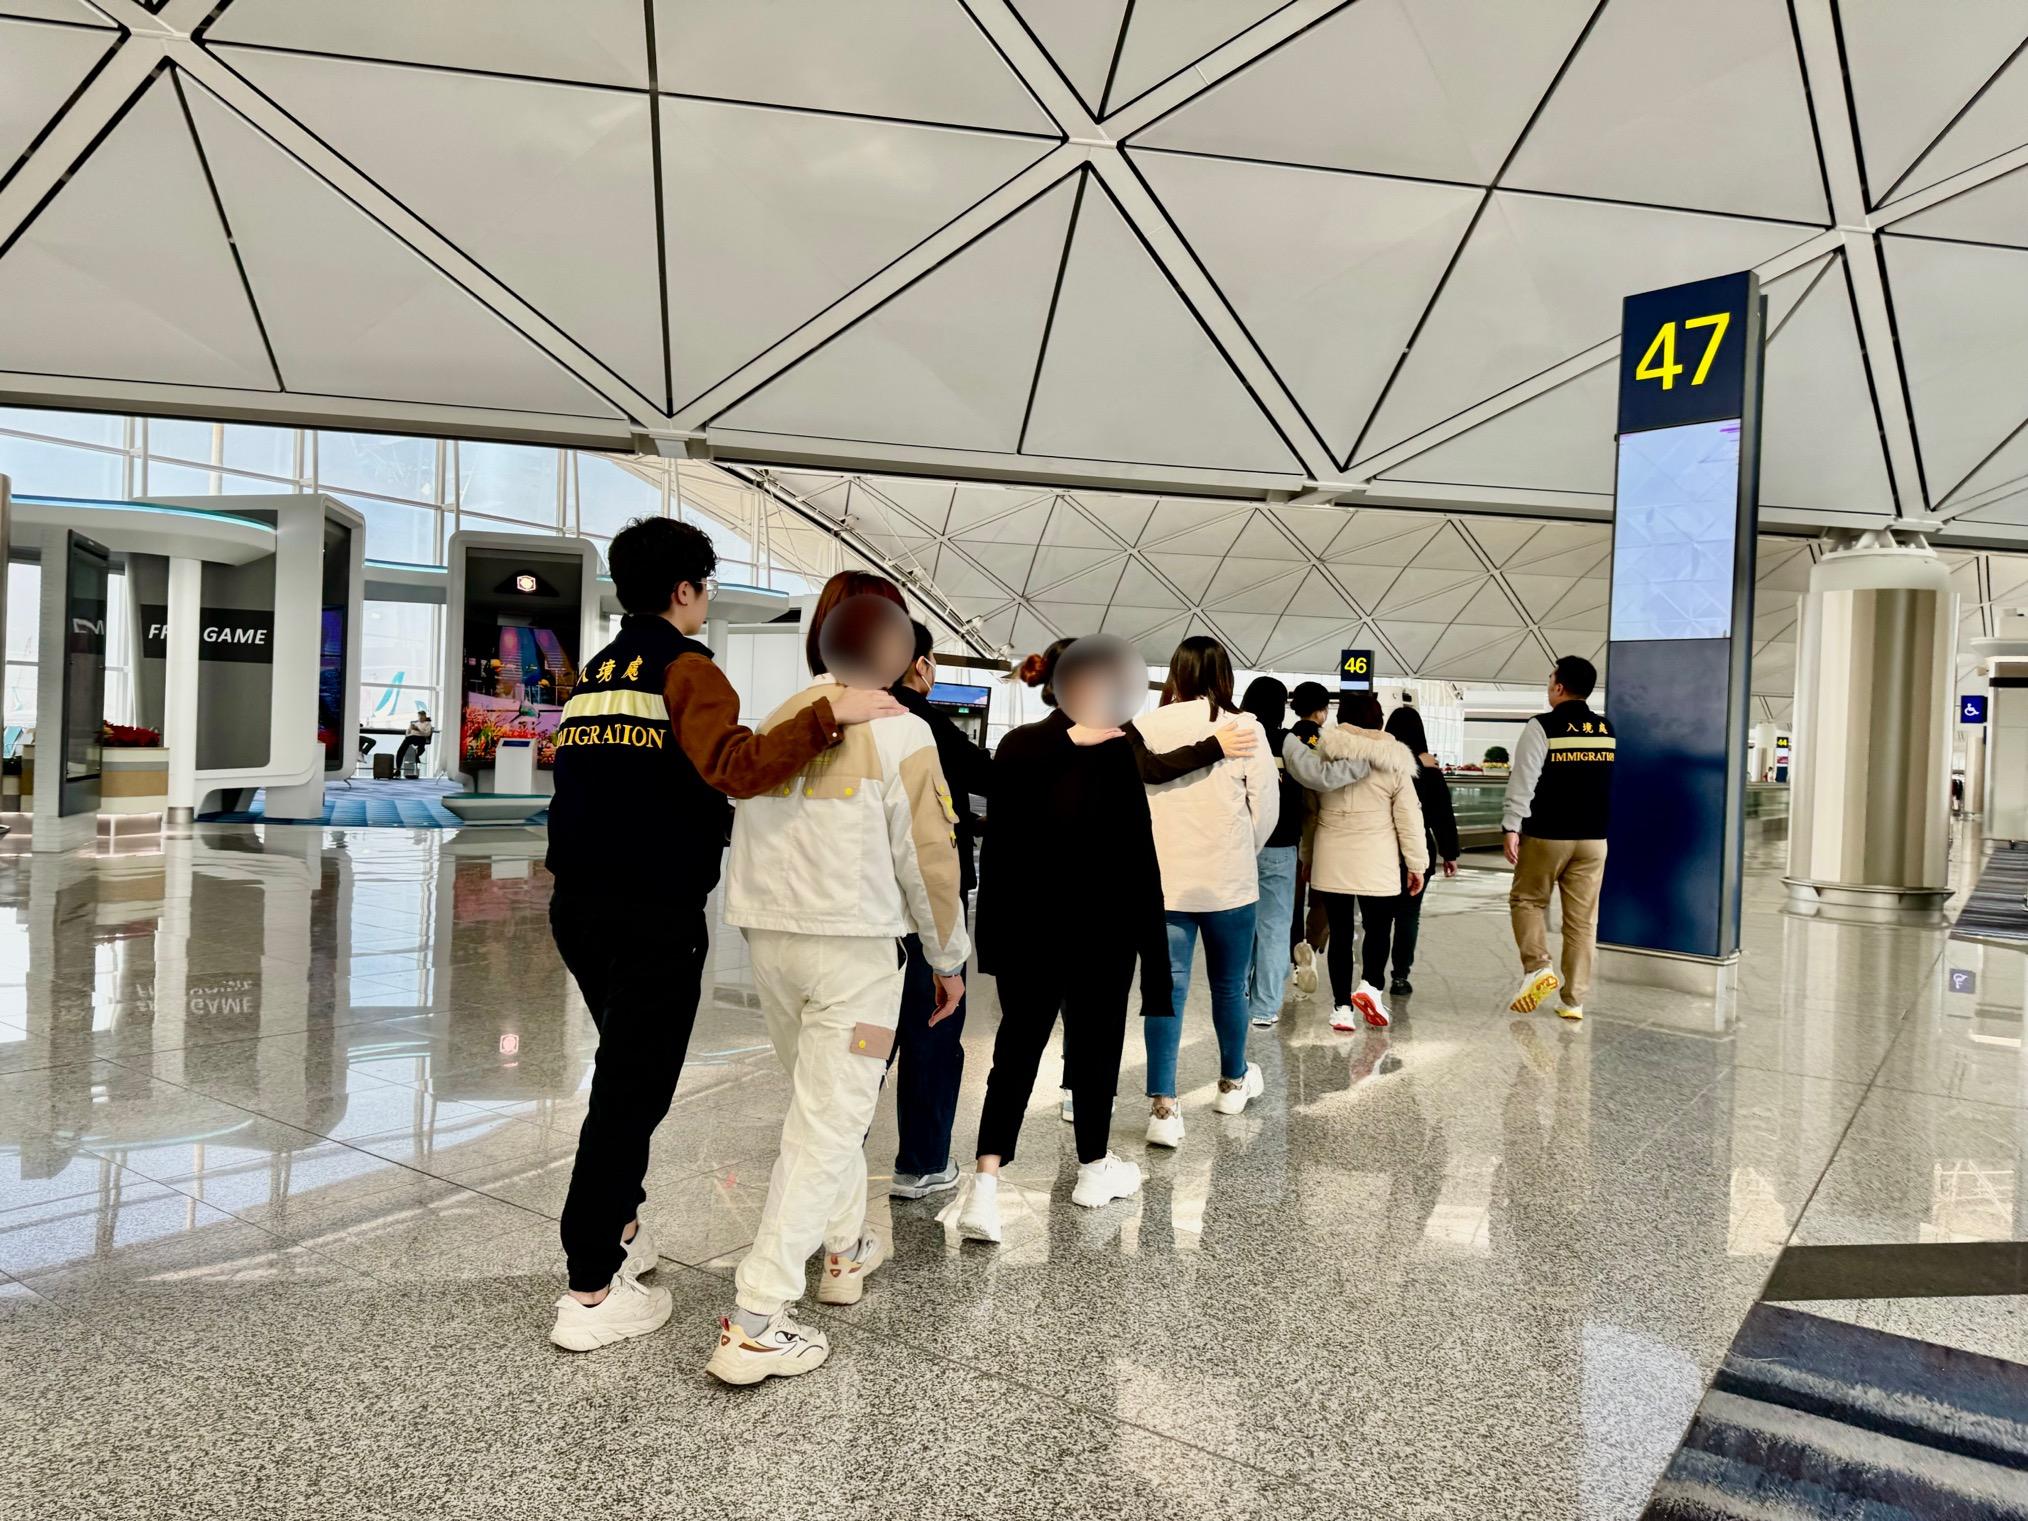 The Immigration Department (ImmD) carried out a repatriation operation today (December 28). A total of 16 Vietnamese illegal immigrants were repatriated to Vietnam. Photo shows removees being escorted by ImmD officers to depart from Hong Kong.